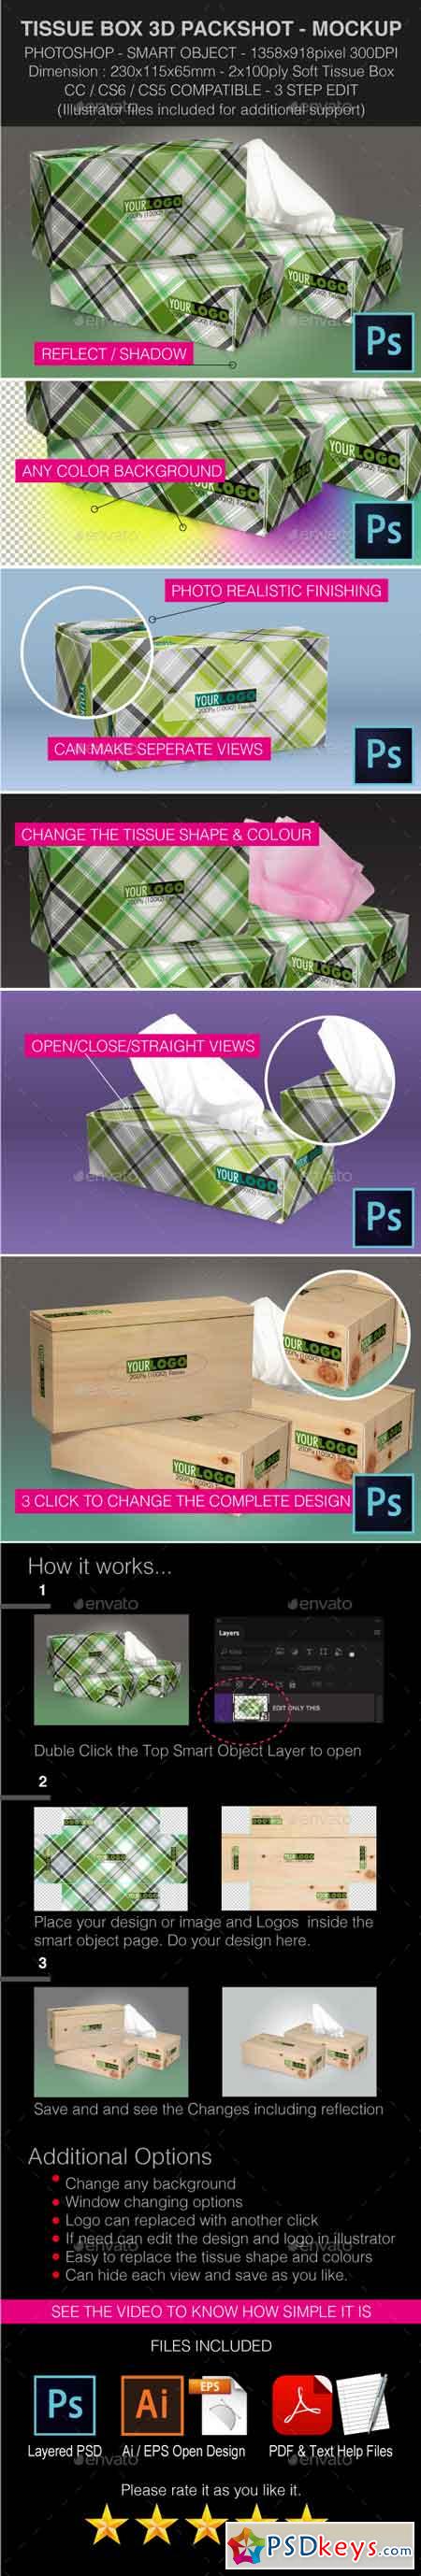 Tissue Box 3D Perspective Mockups PSD 16822264